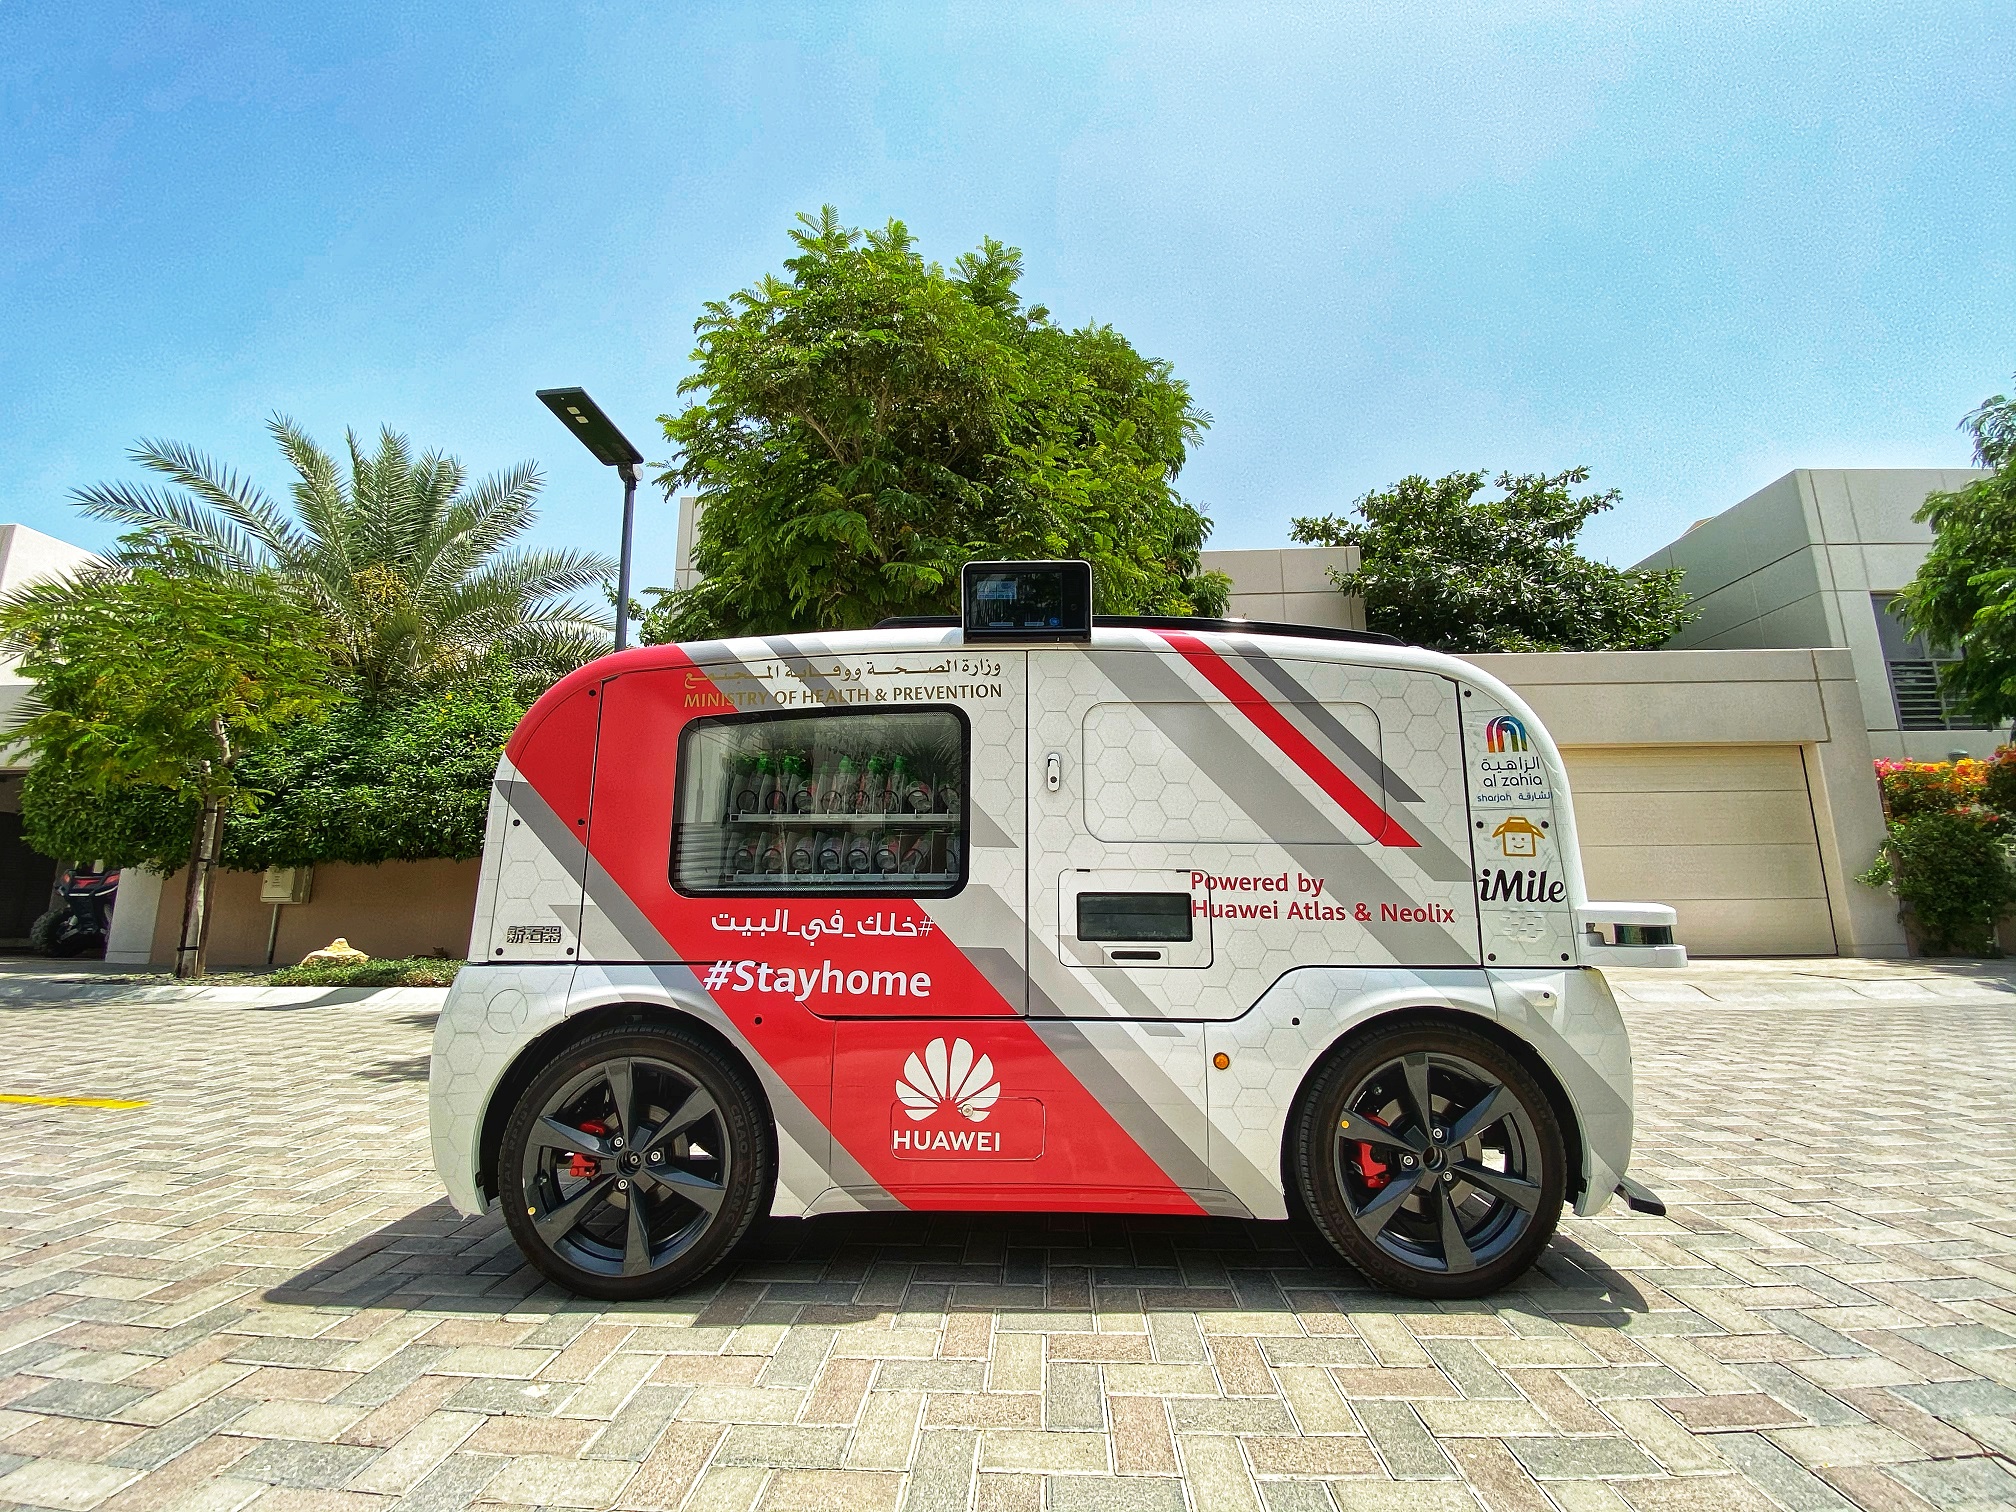 Al Zahia deployed the first driverless car in the UAE to support the health and wellbeing of residents